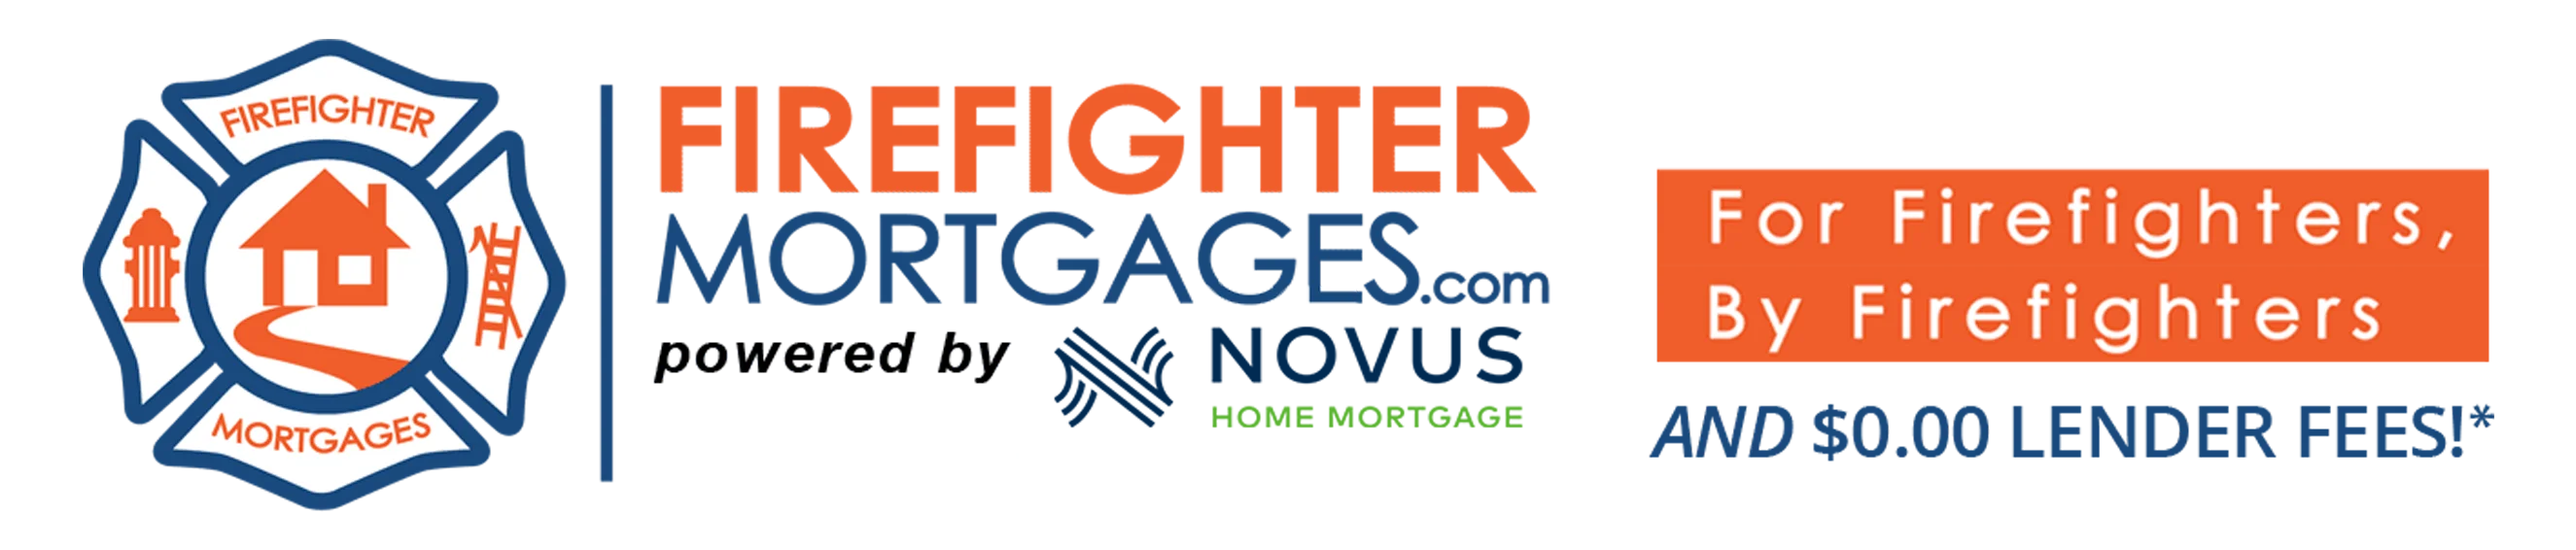 Firefighter Mortgages® Logo